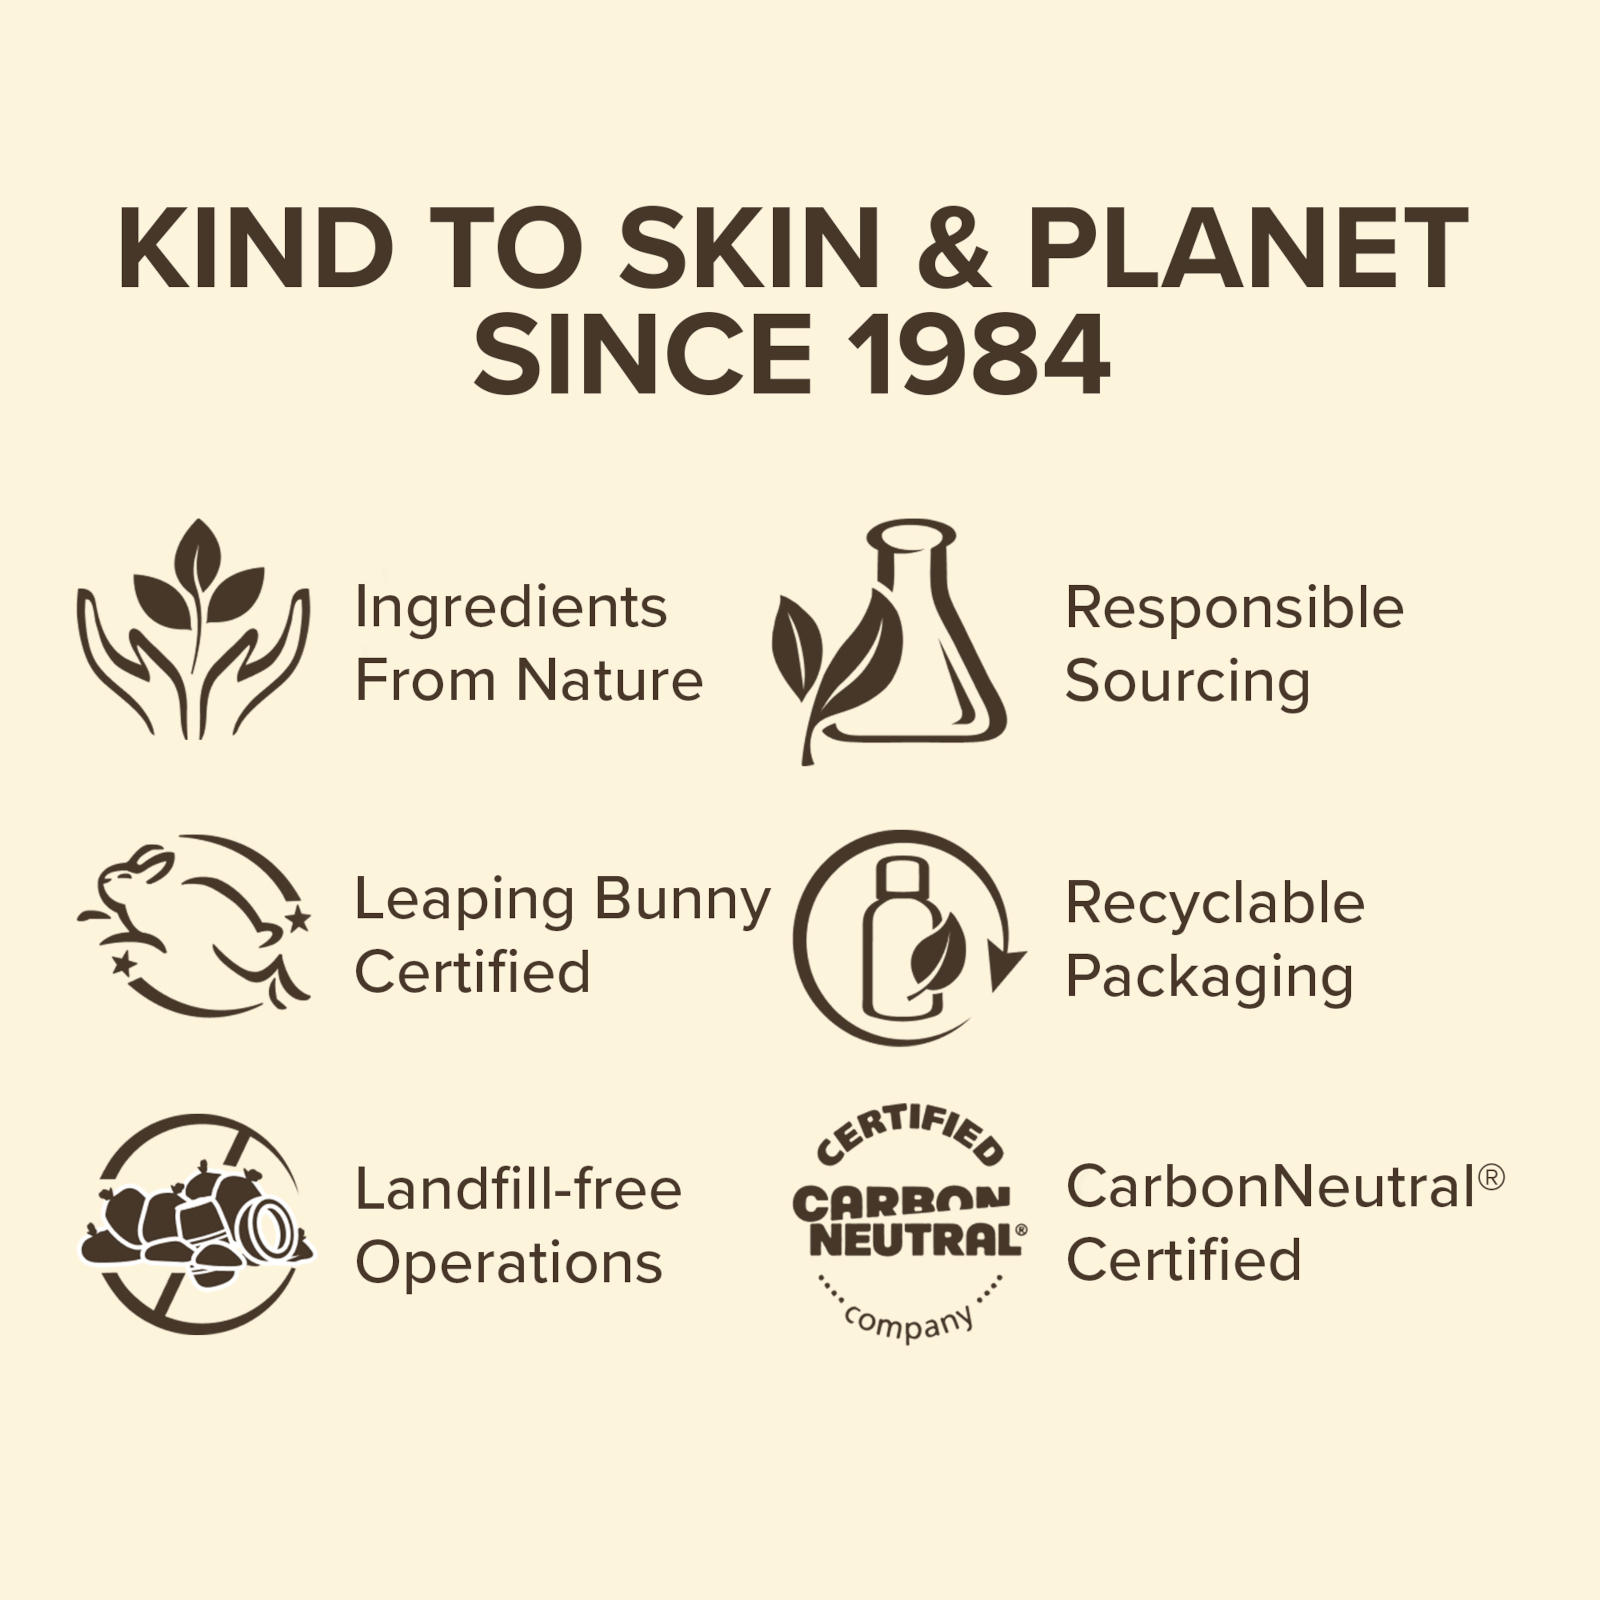 KIND TO SKIN & PLANET SINCE 1984 
              Ingredients From Nature 
              Leaping Bunny Certified 
              Landfill-free Operations 
              oiA 
              Responsible Sourcing 
              Recyclable Packaging 
              